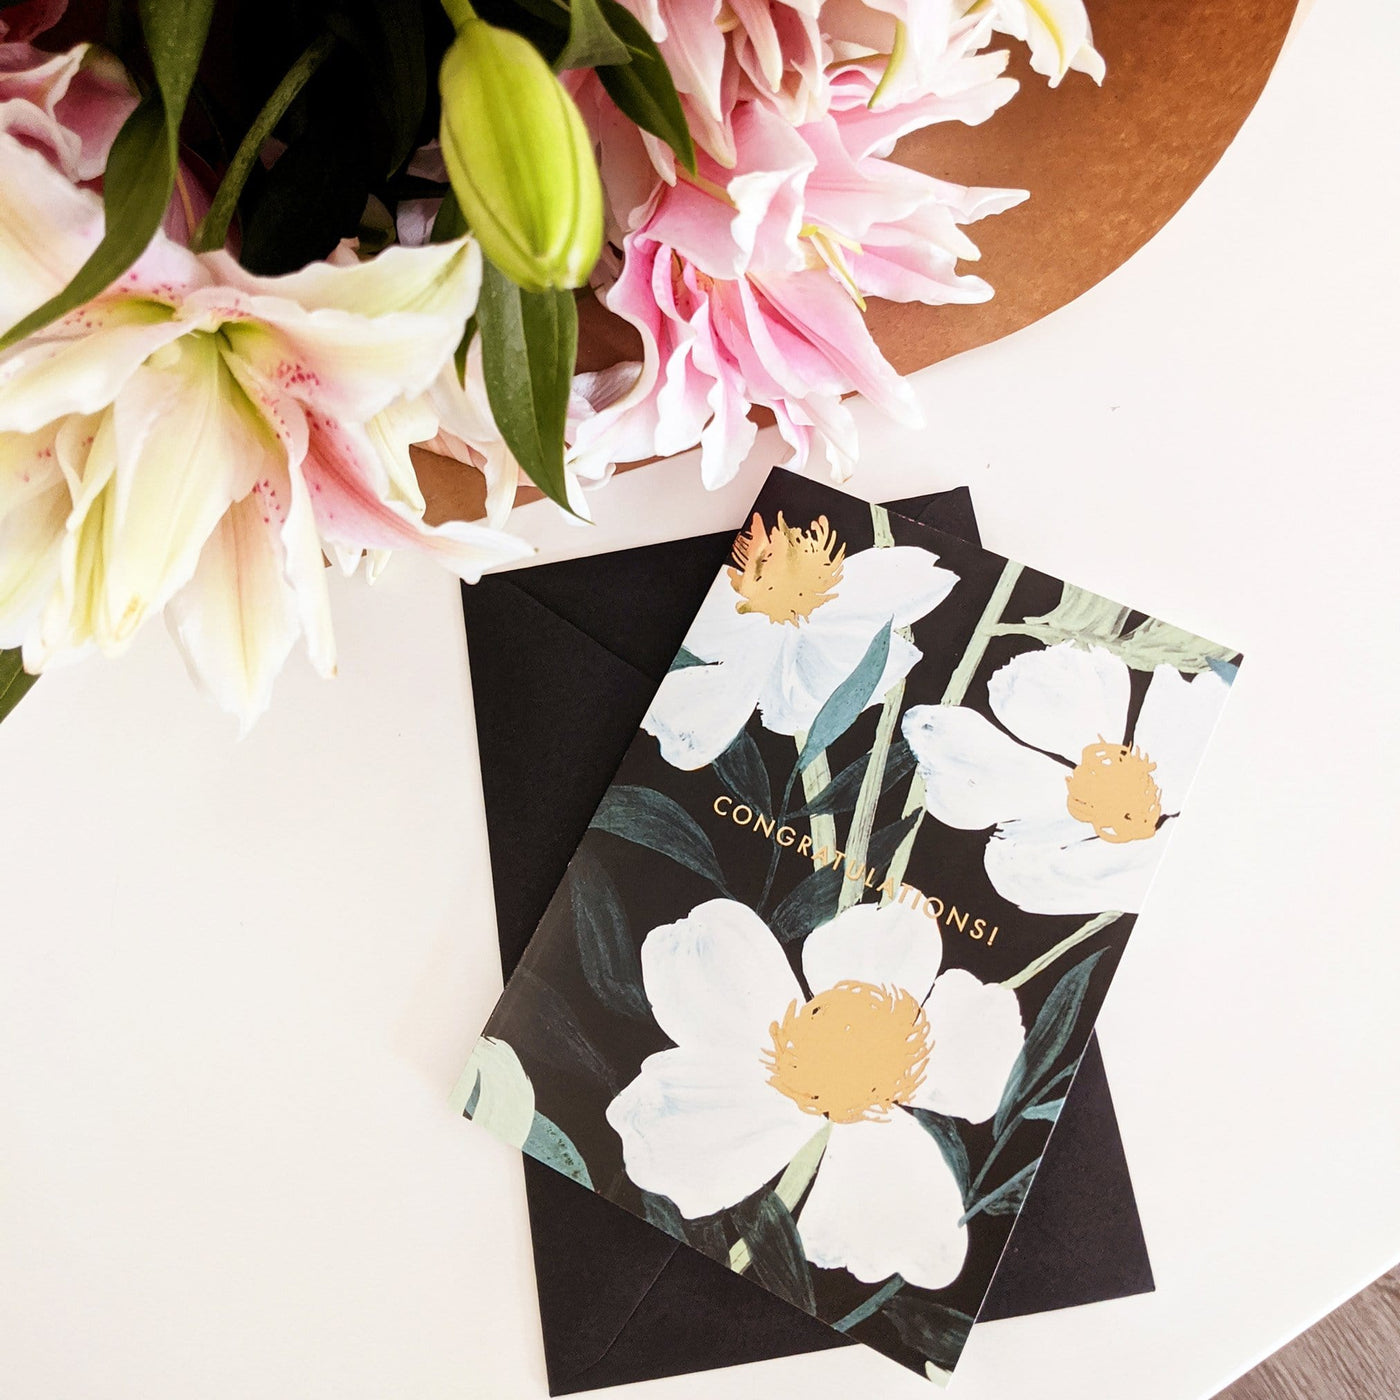 Illustrated White Flowers With Teal Leaves and Gold Centres On A Black Card With Congratulations In Gold With A Black Envelope On A White Table - Annie Dornan Smith